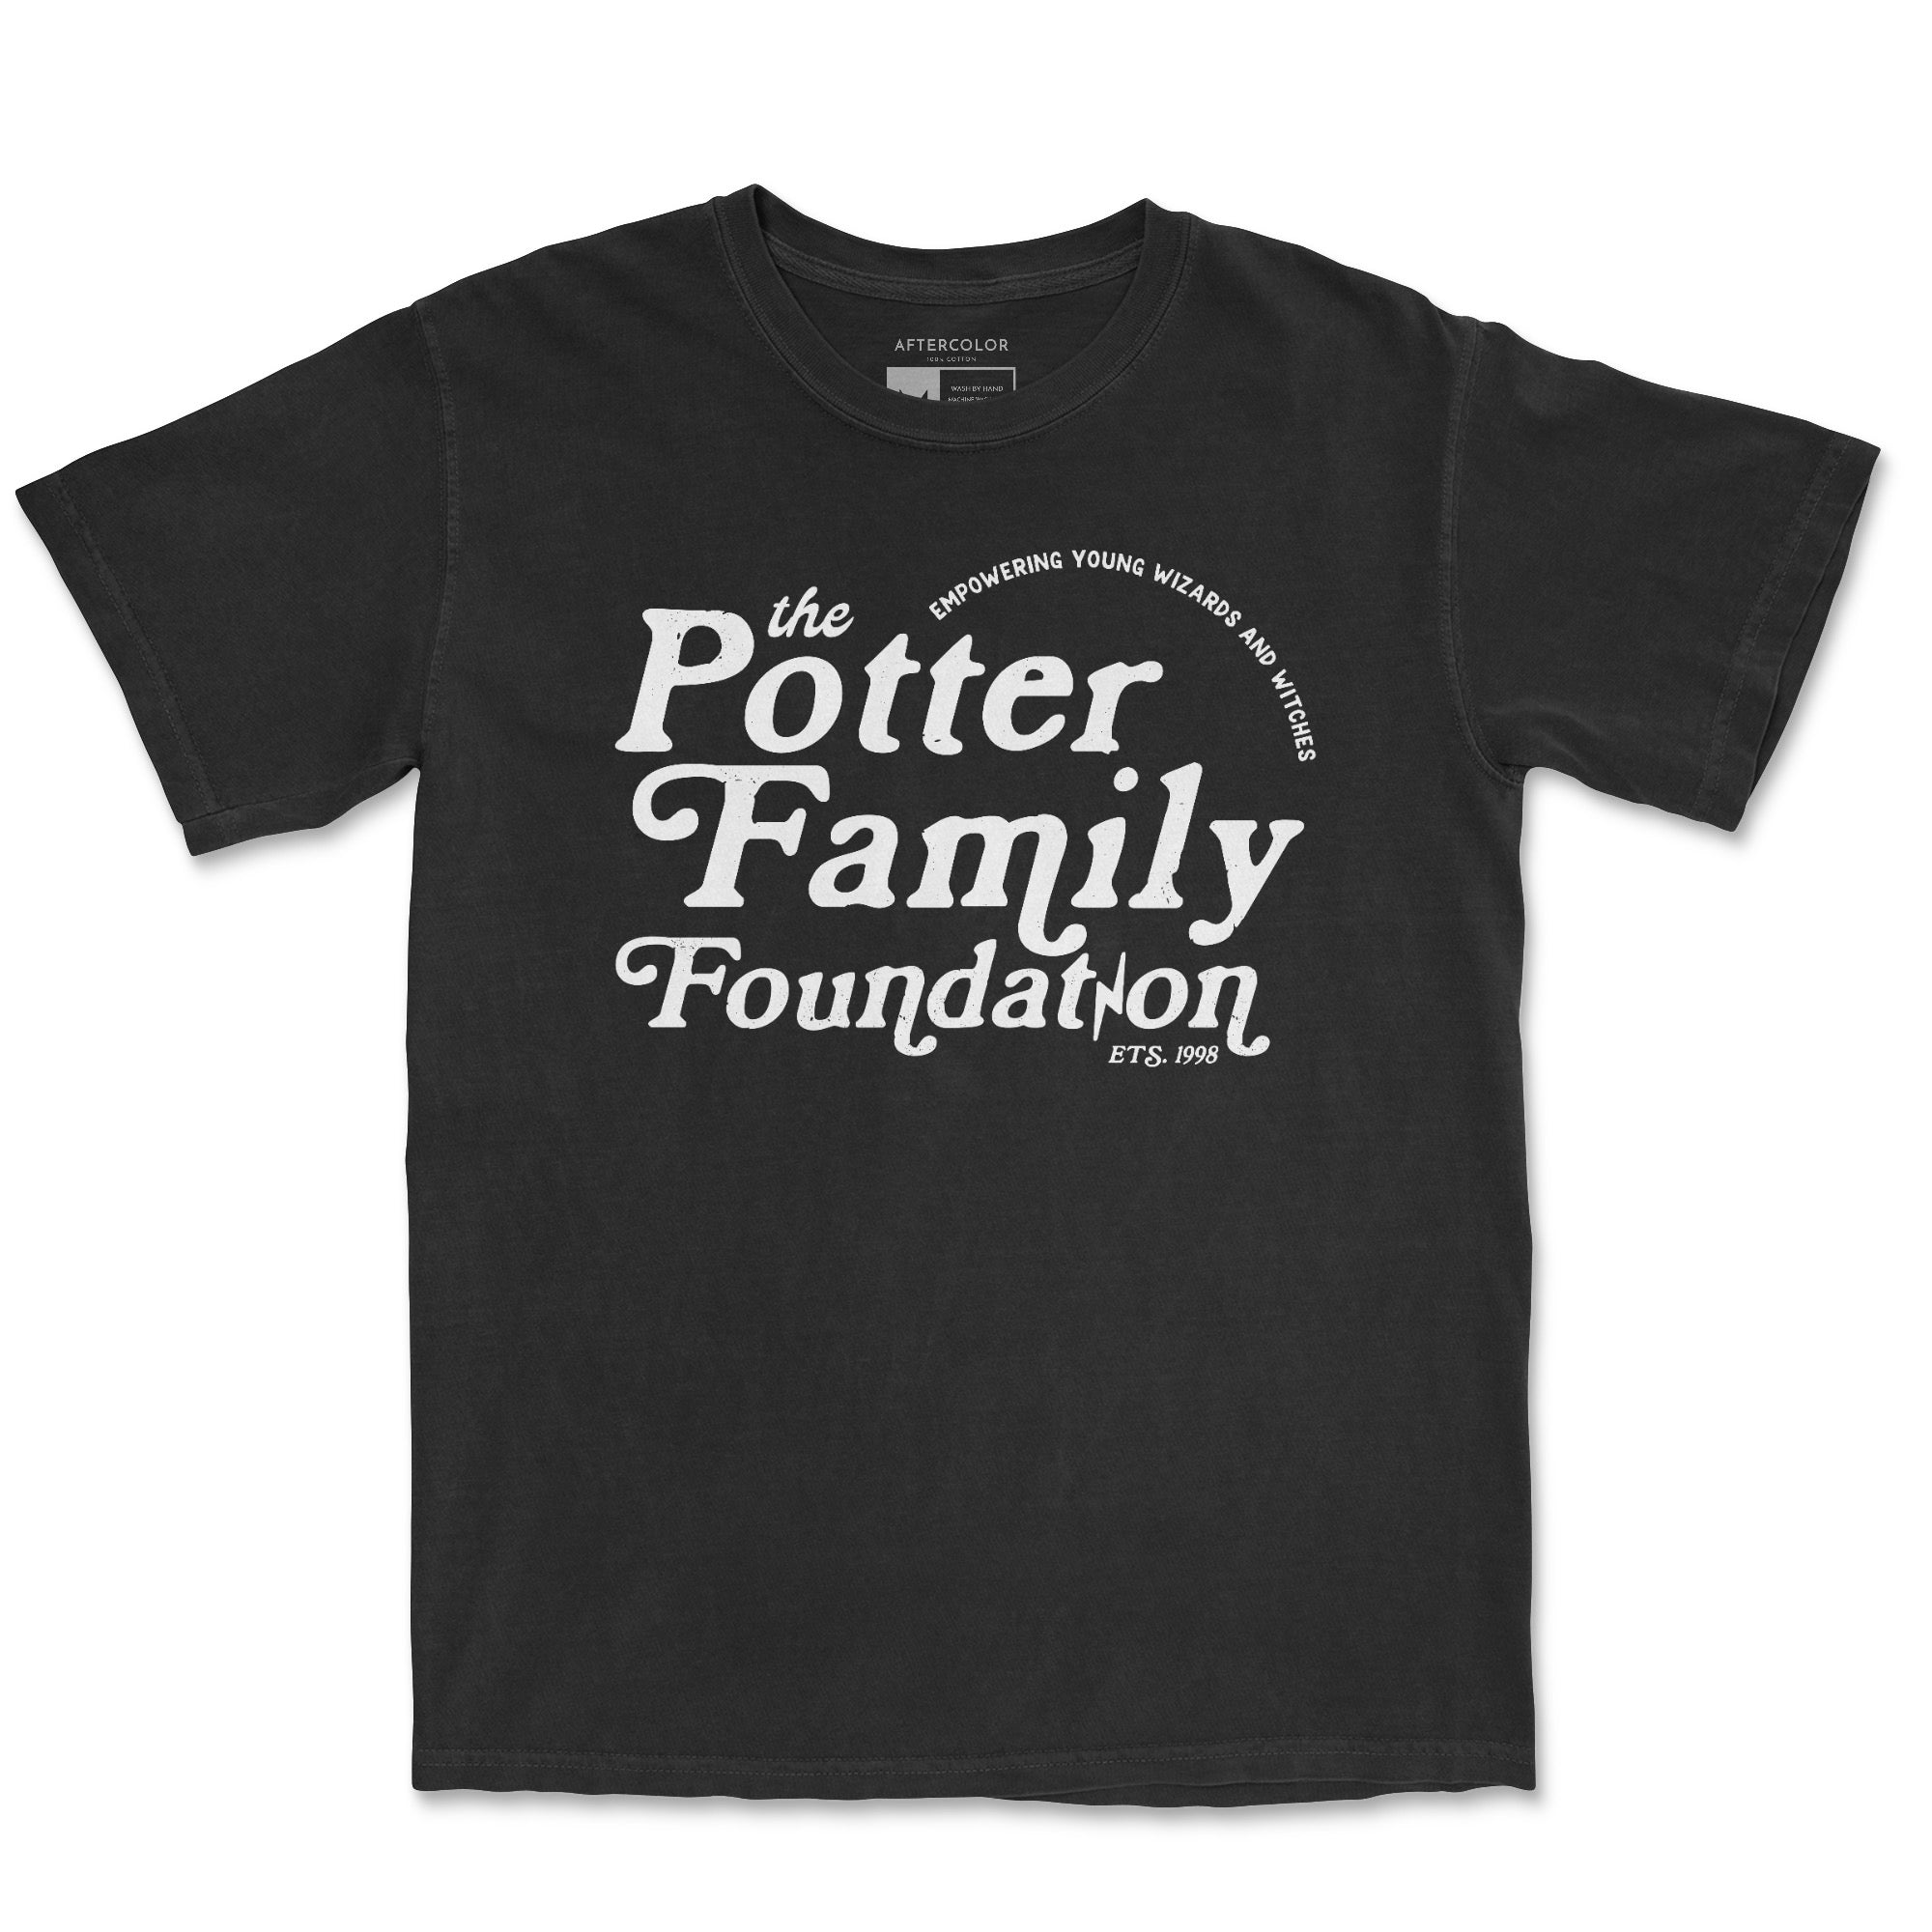 The Potter Family Foundation Tee